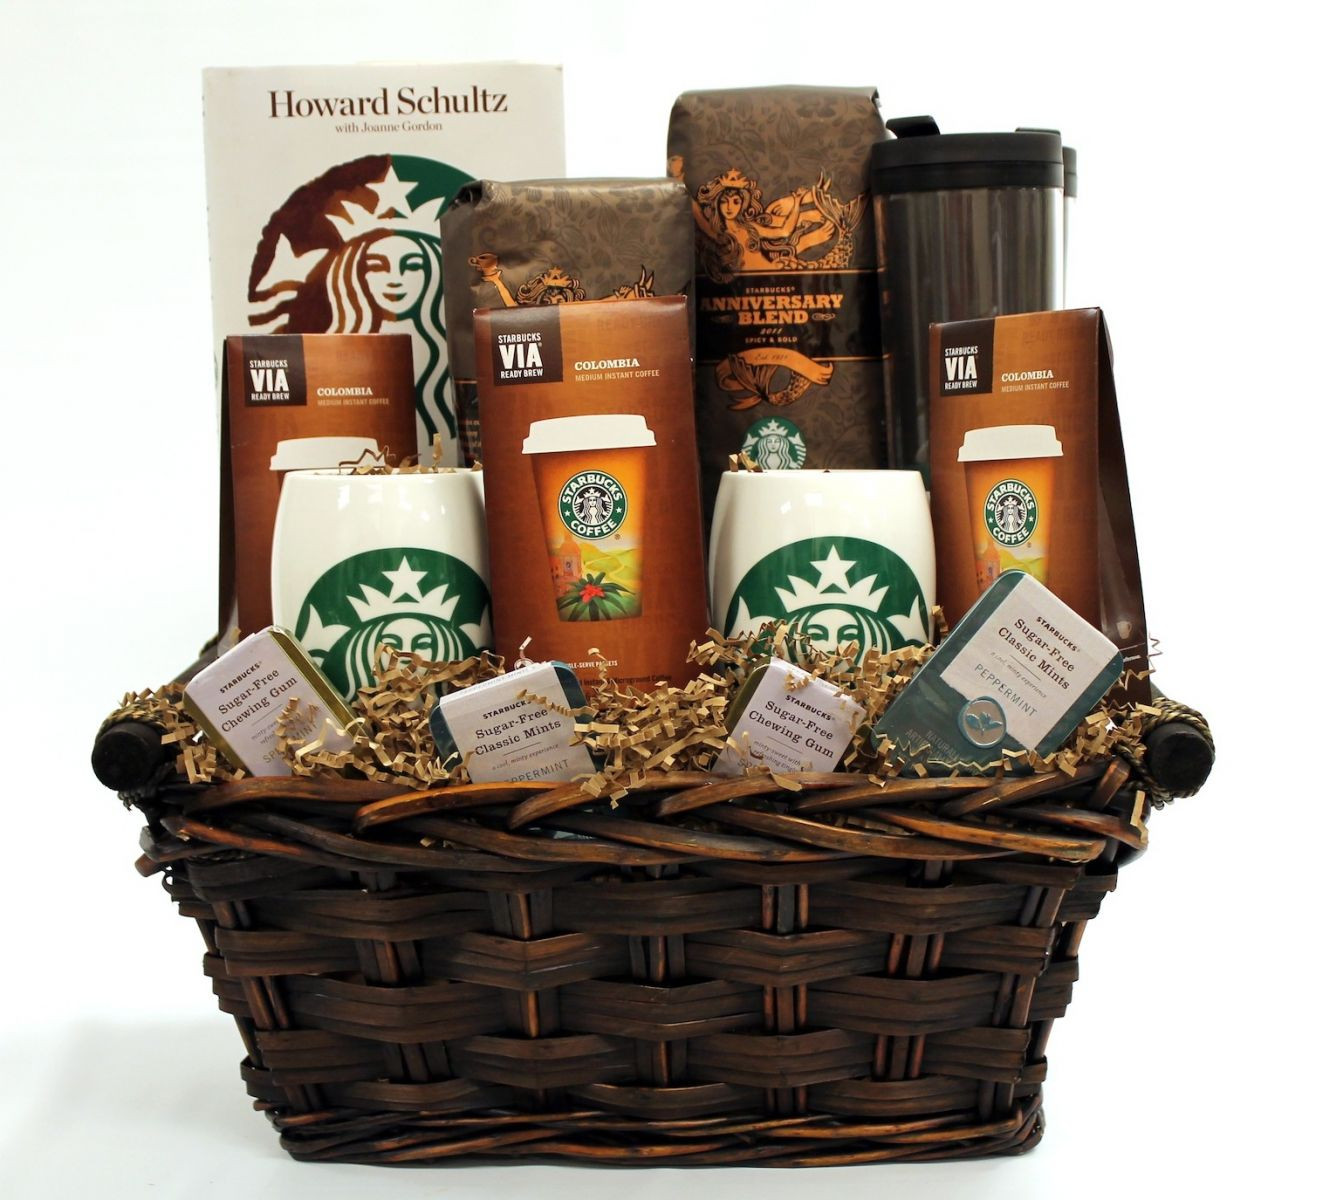 Raffle Gift Basket Ideas
 Support the HR Profession by Donating a Basket for the